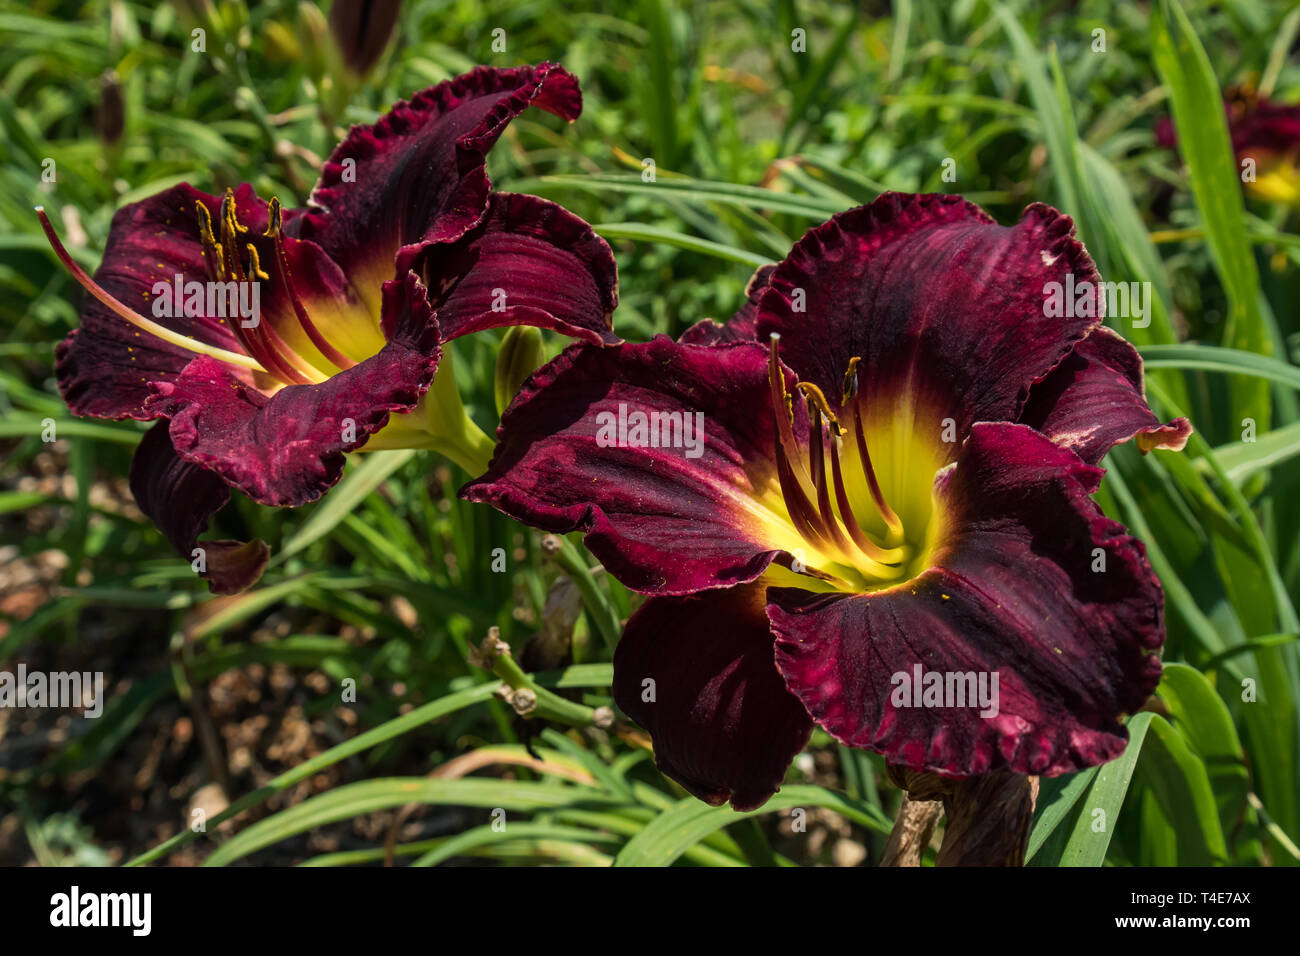 Field of purple and yellow lilies Stock Photo